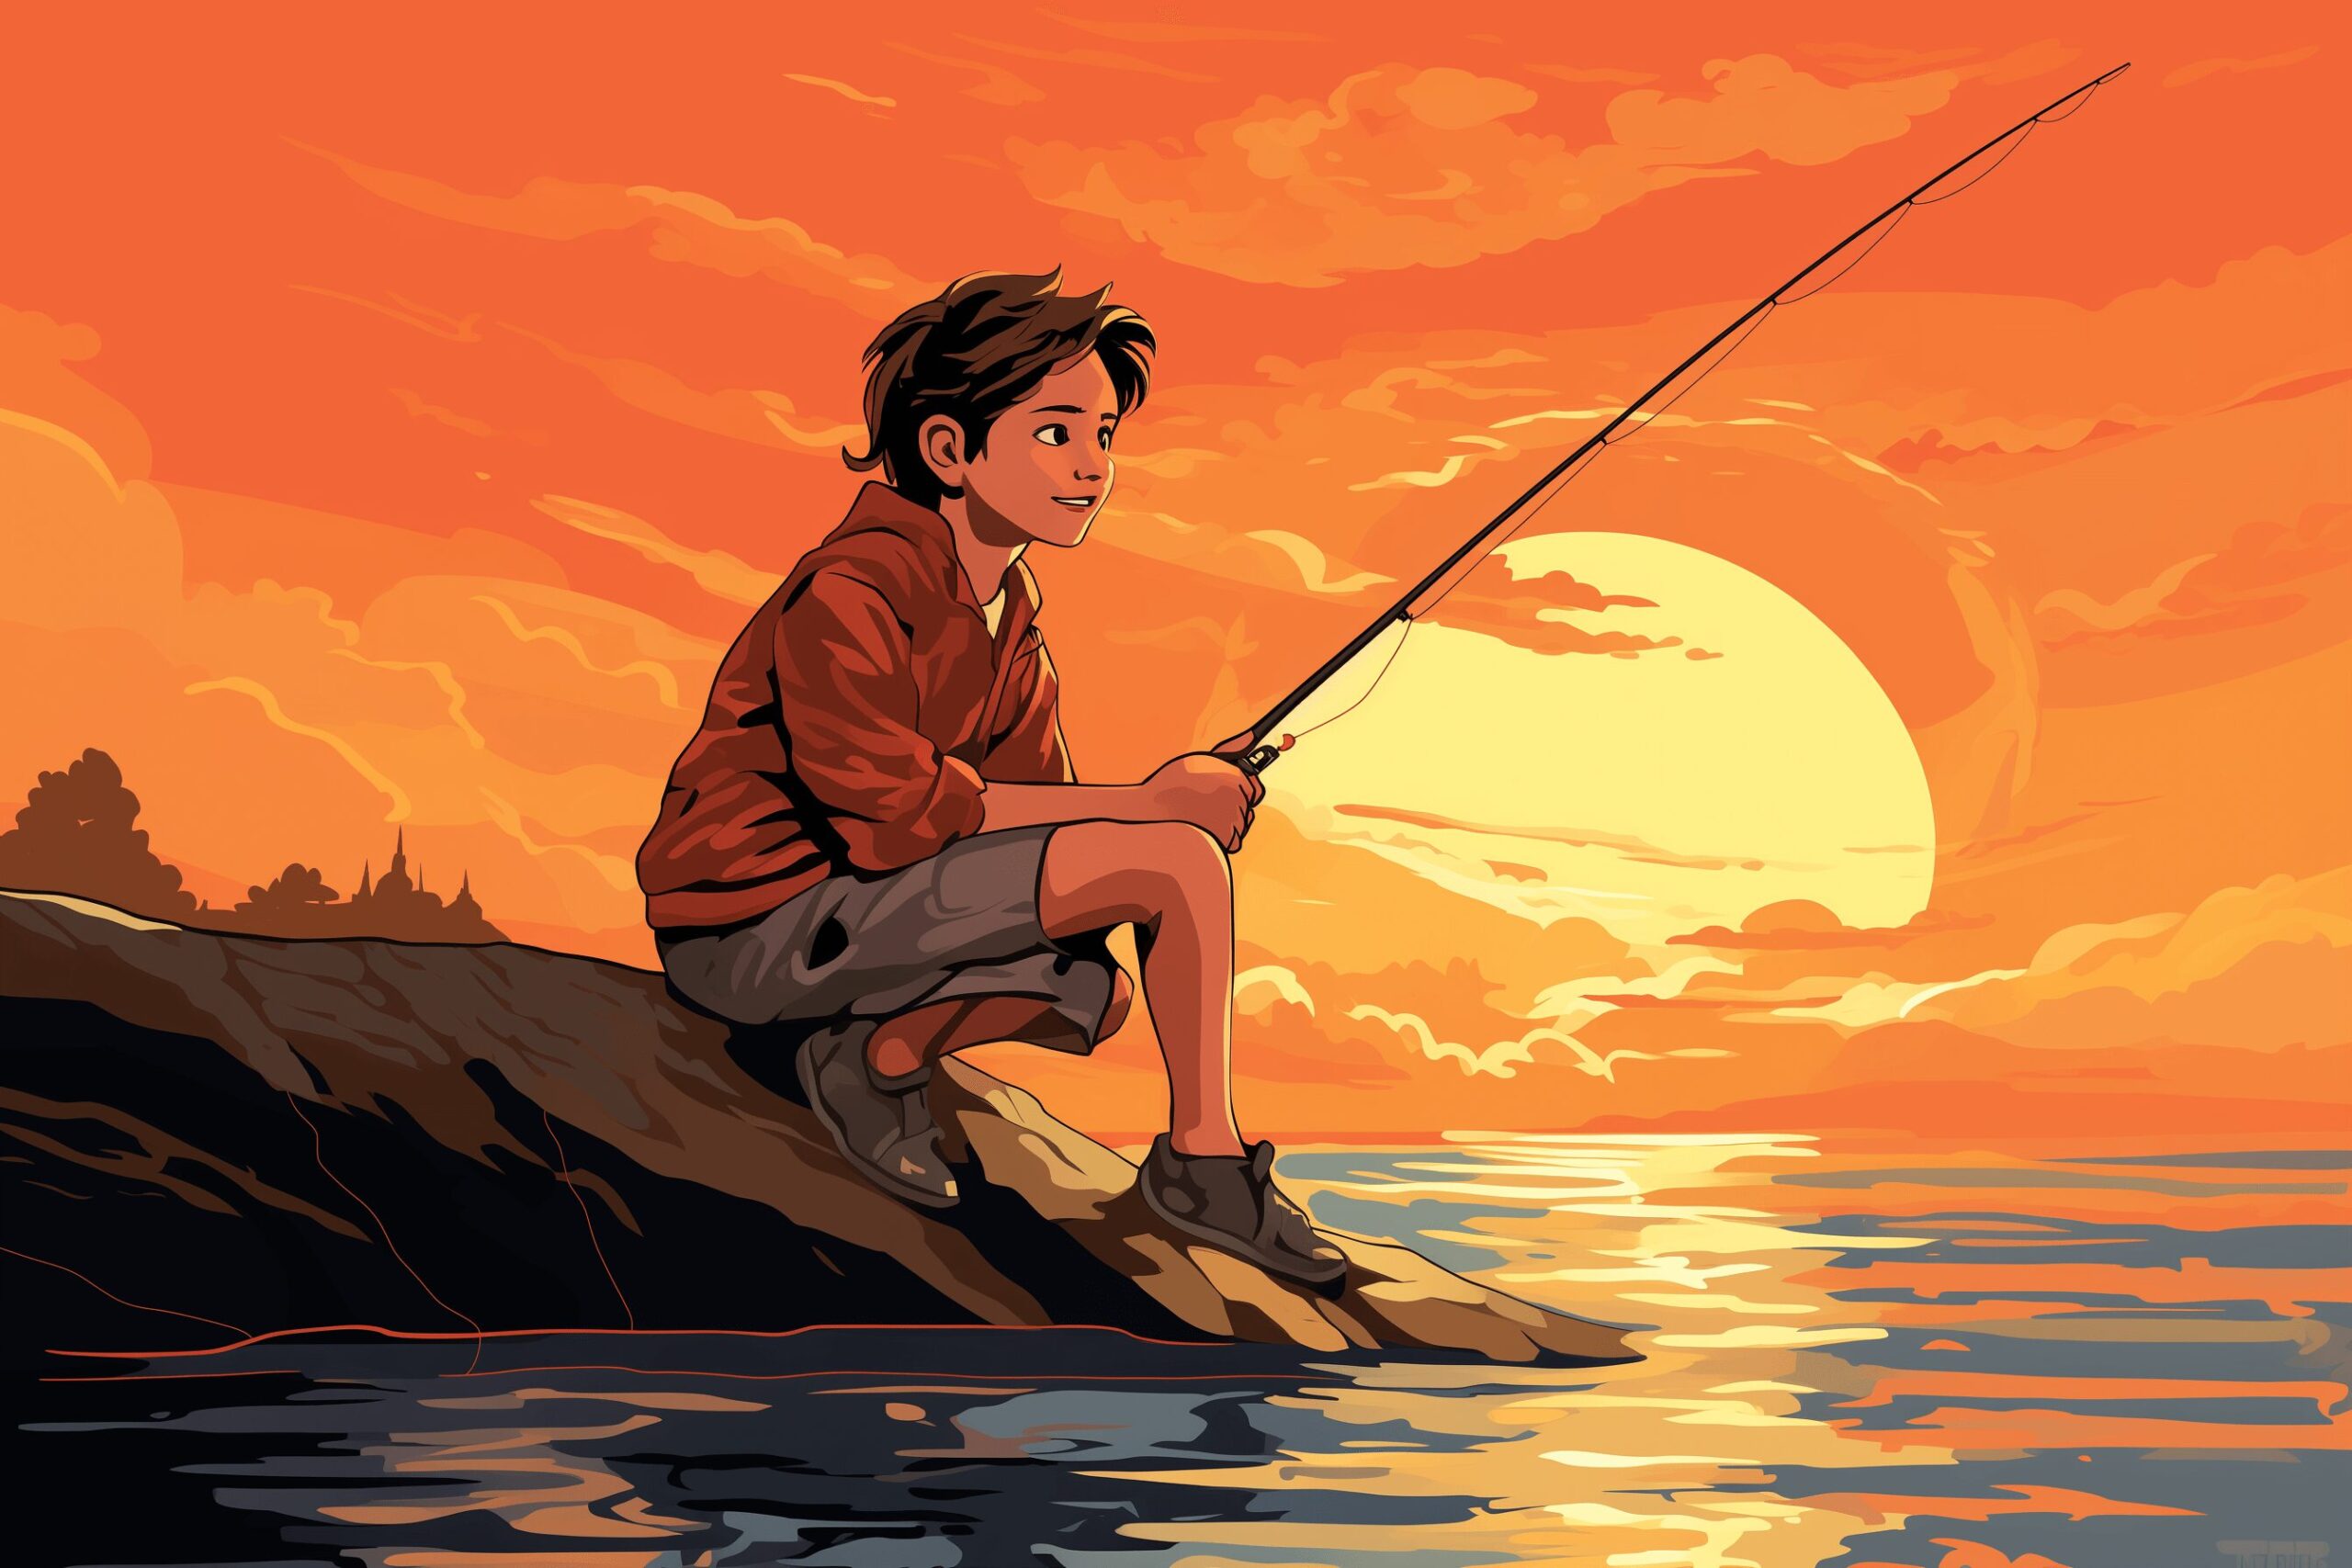 A young boy starting out fishing